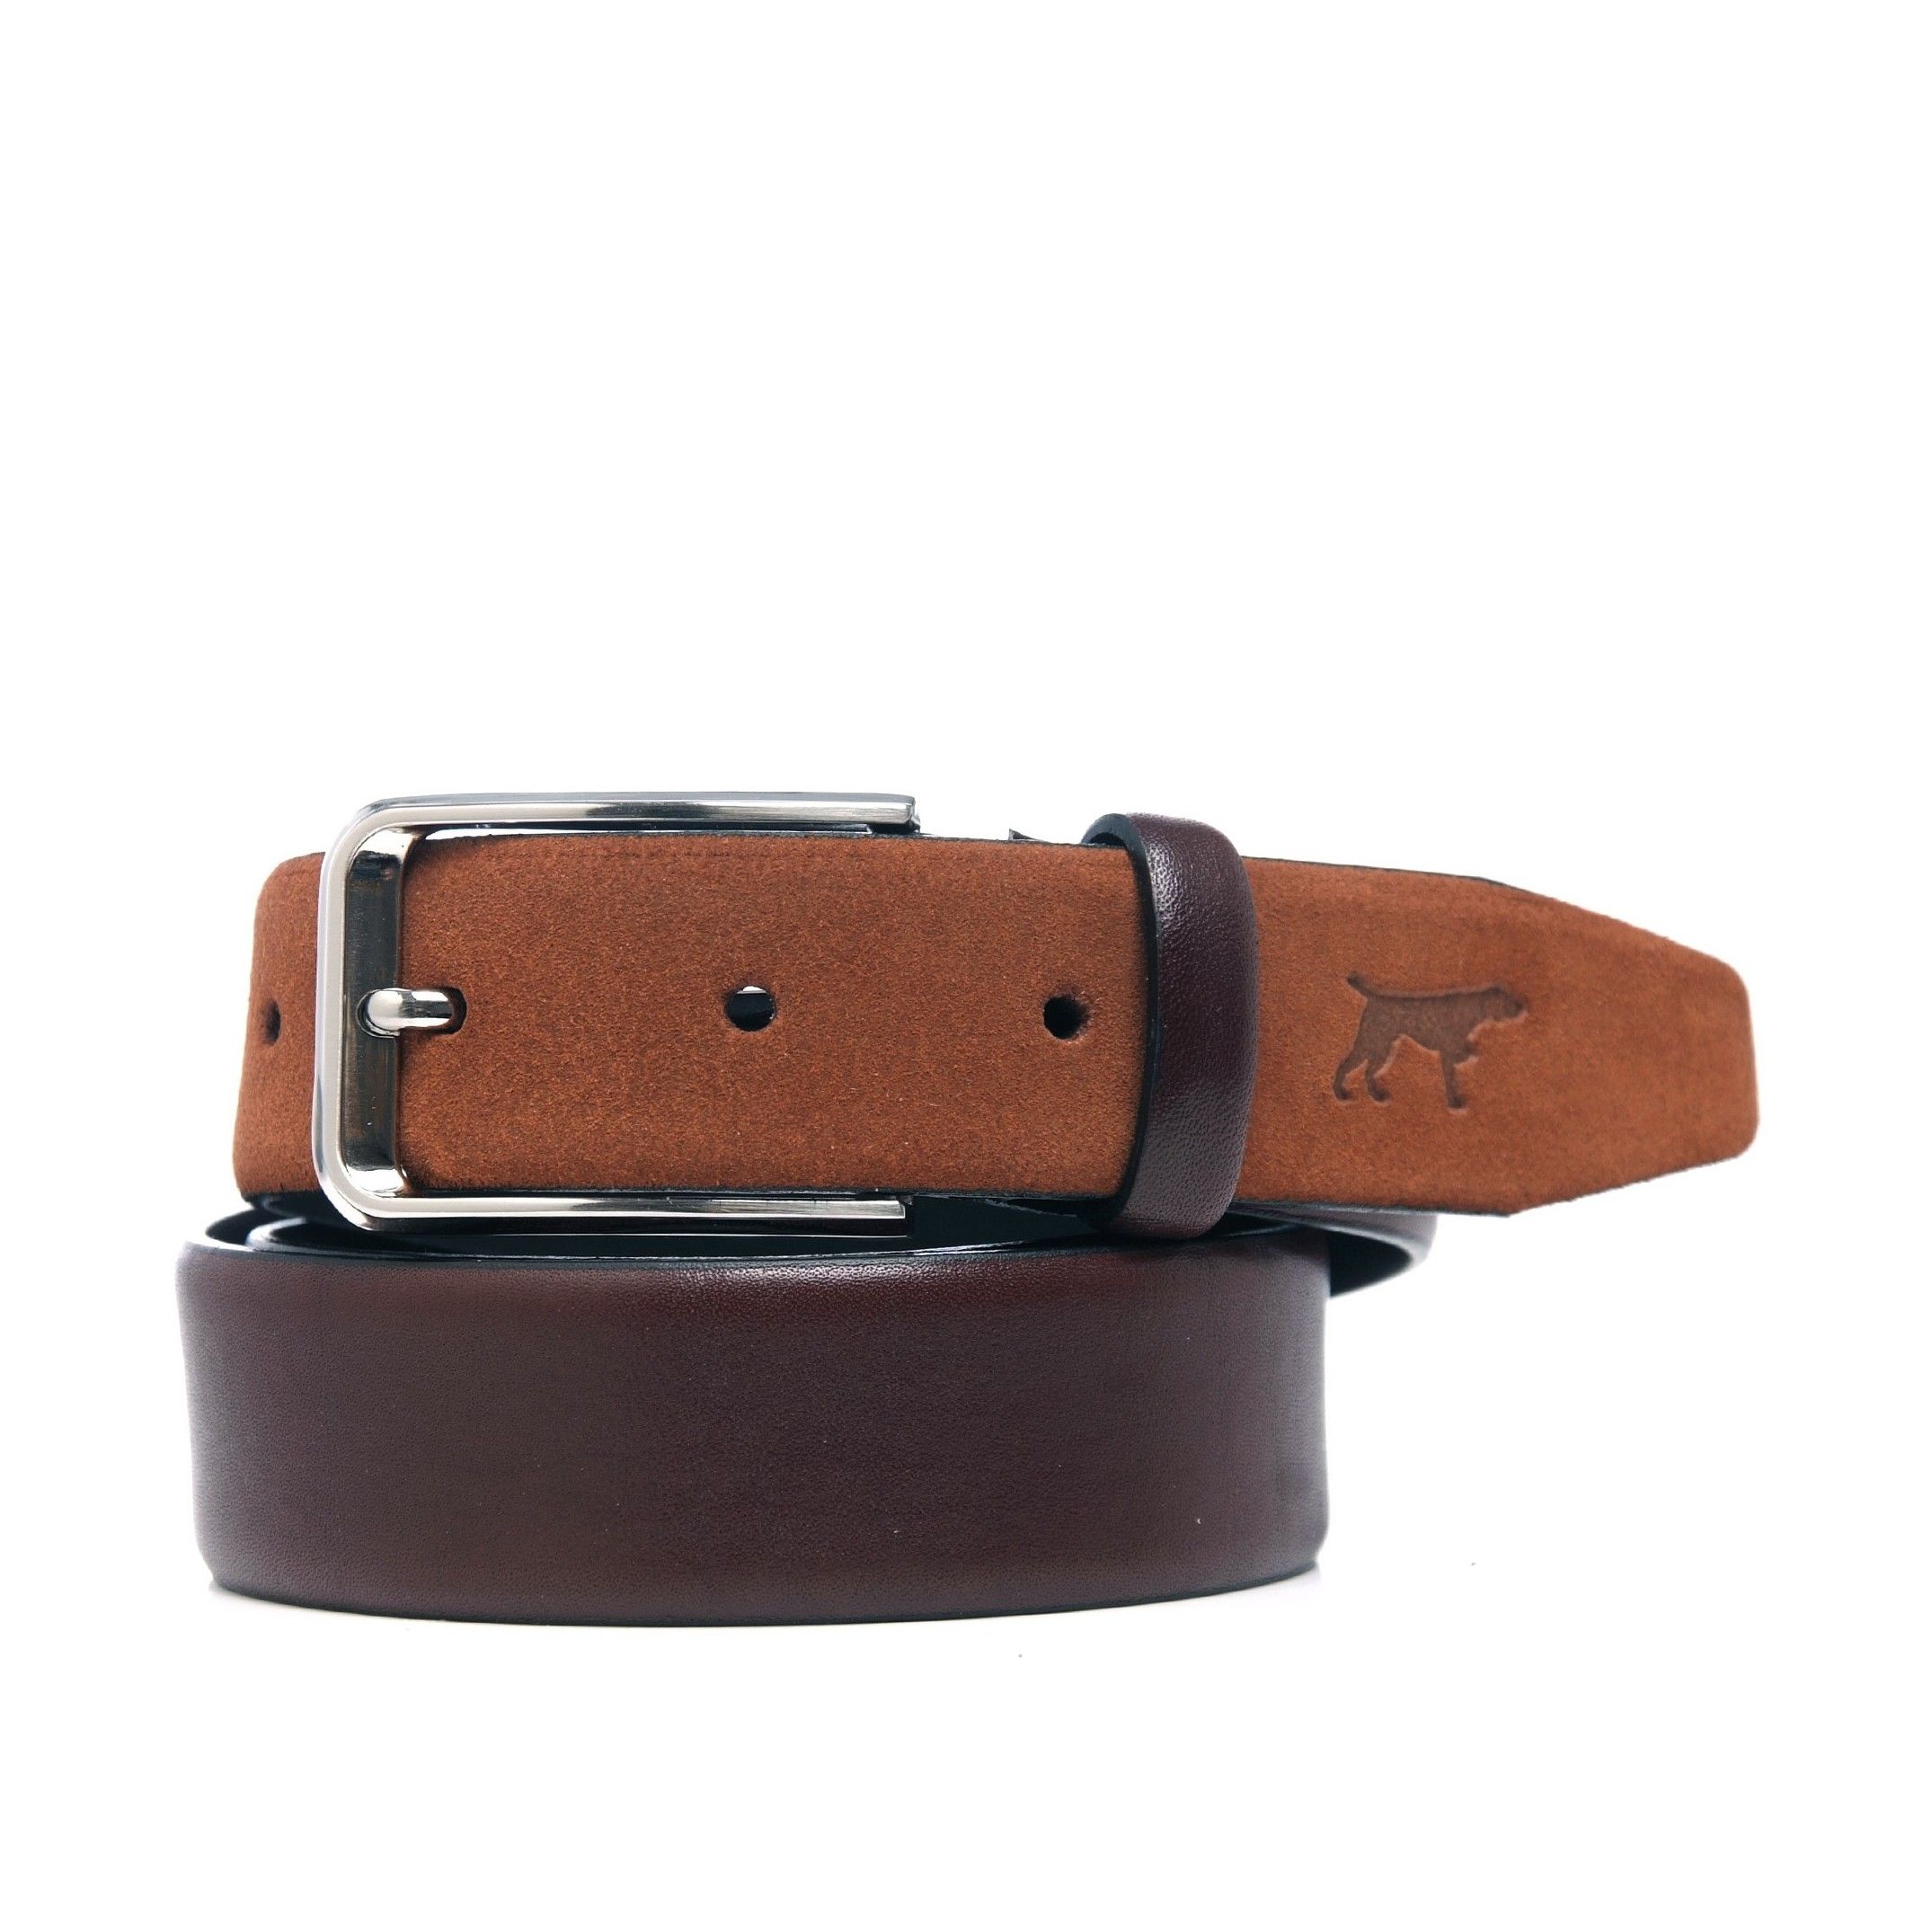 Castellanisimos men's belt with double leather. Metal buckle. Width: 3,5cm. MADE IN SPAIN.